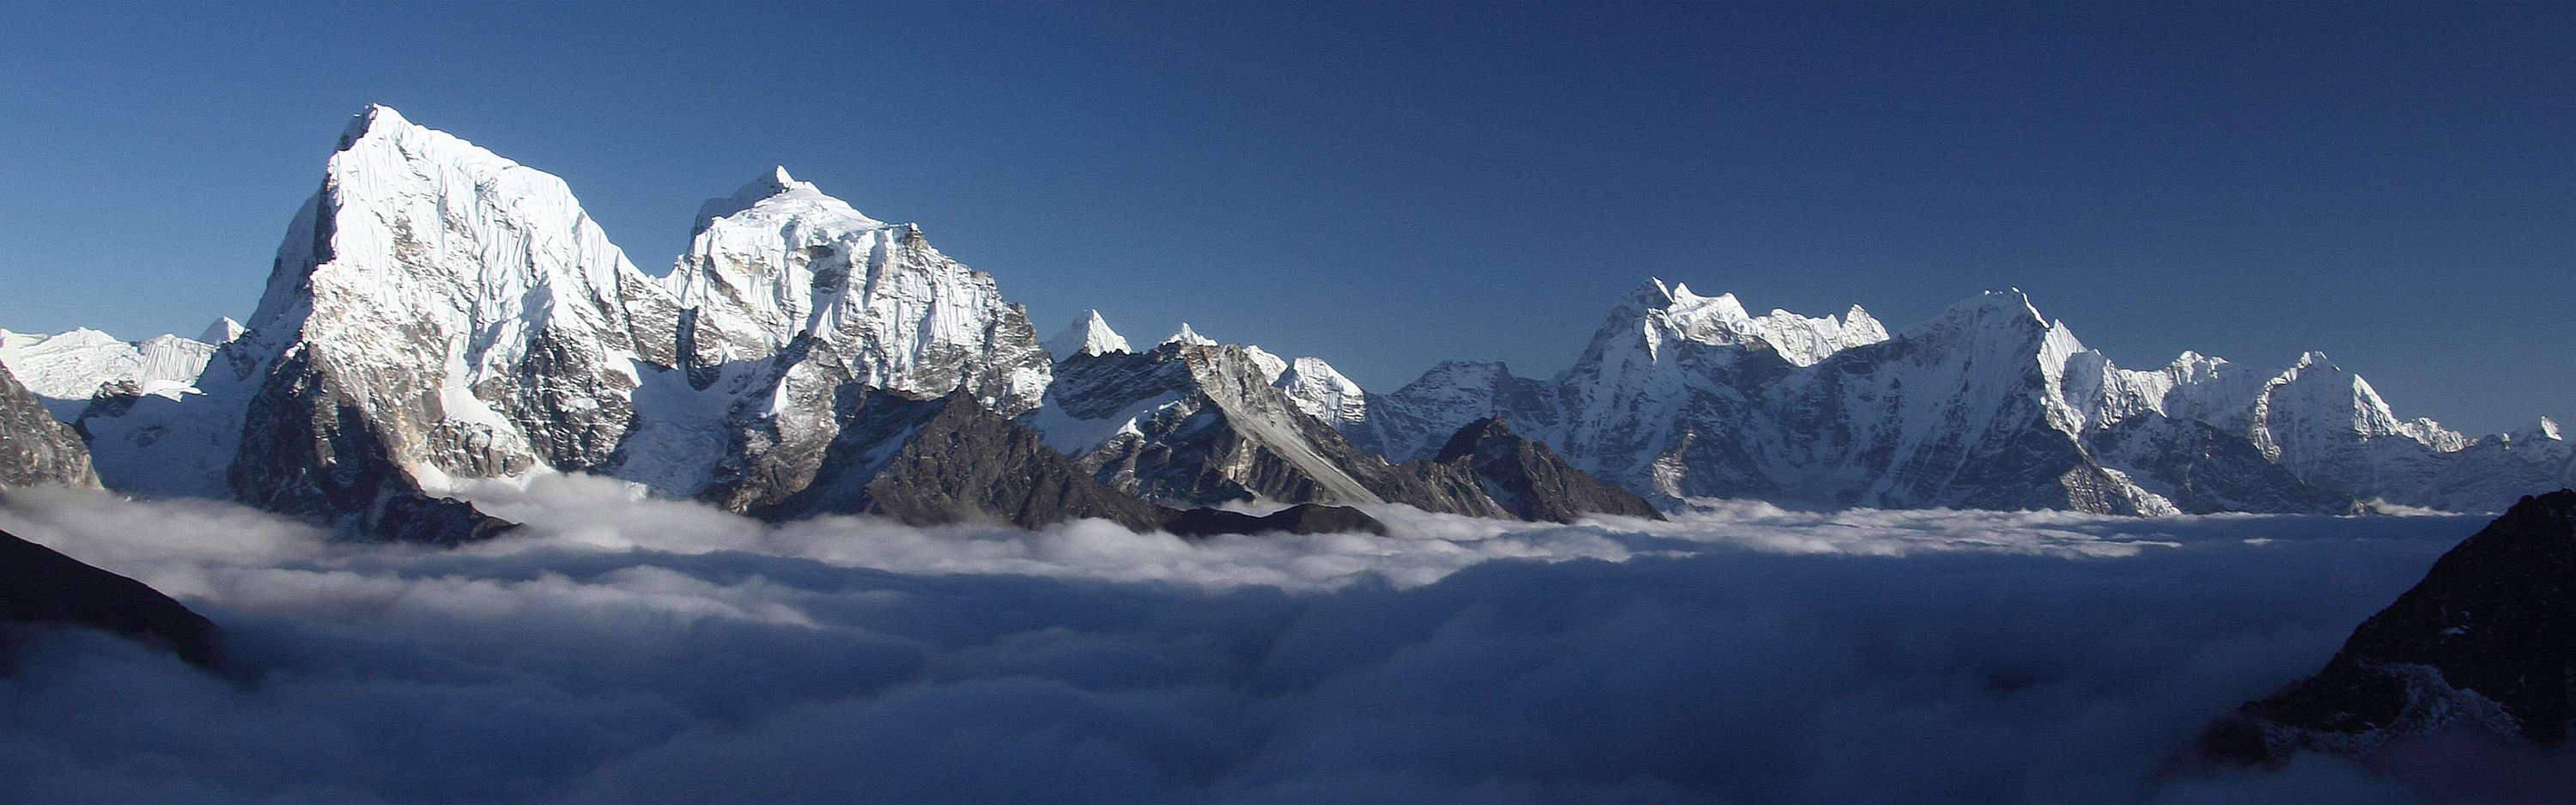 Gokyo Valley  |  Above the clouds